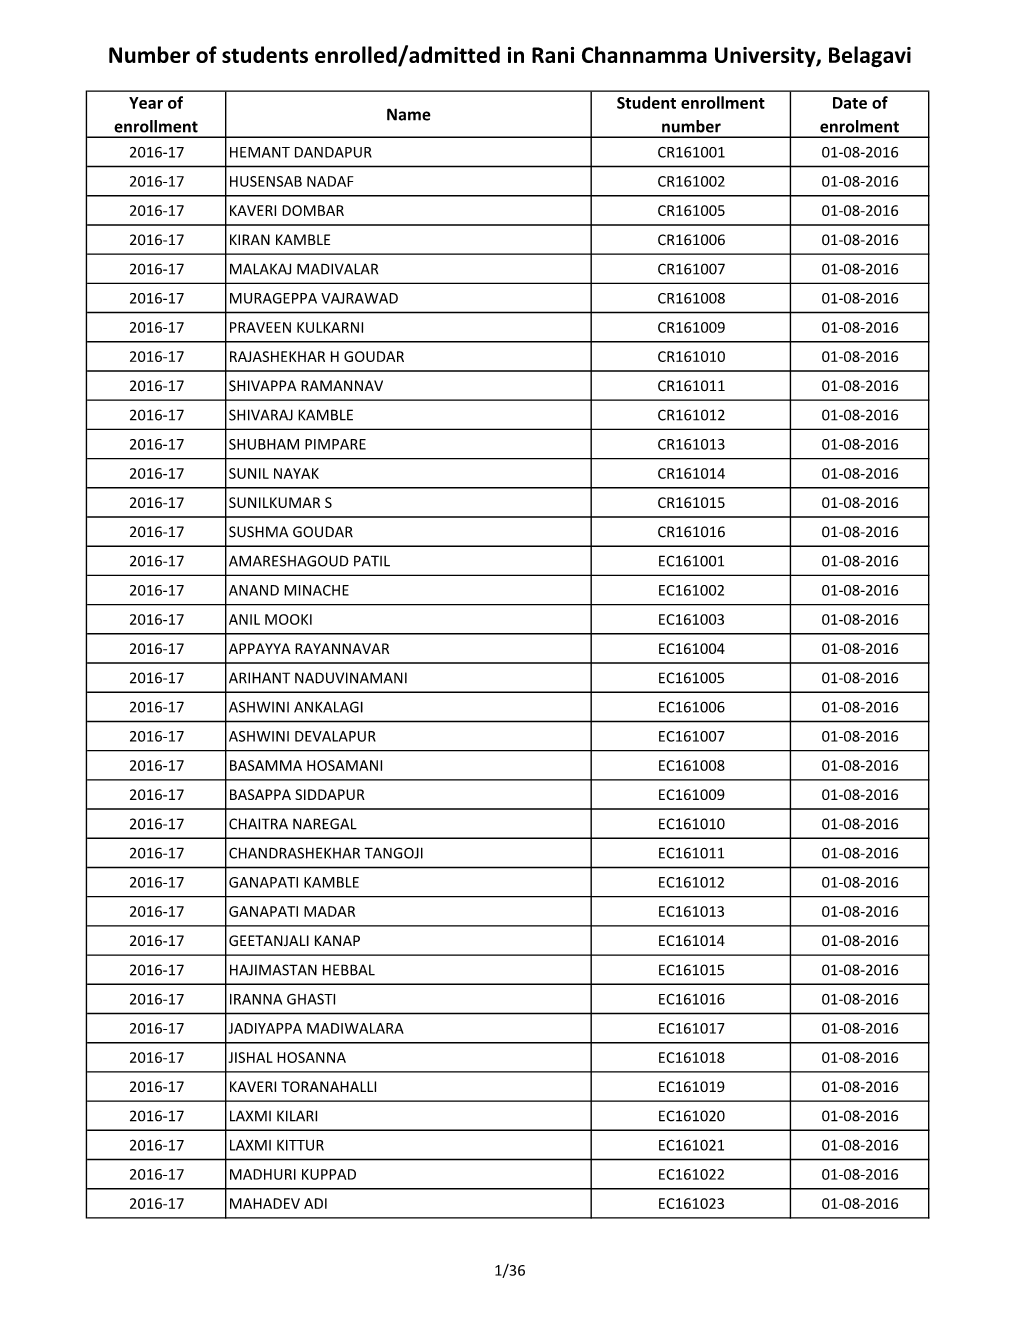 Number of Students Enrolled/Admitted in Rani Channamma University, Belagavi